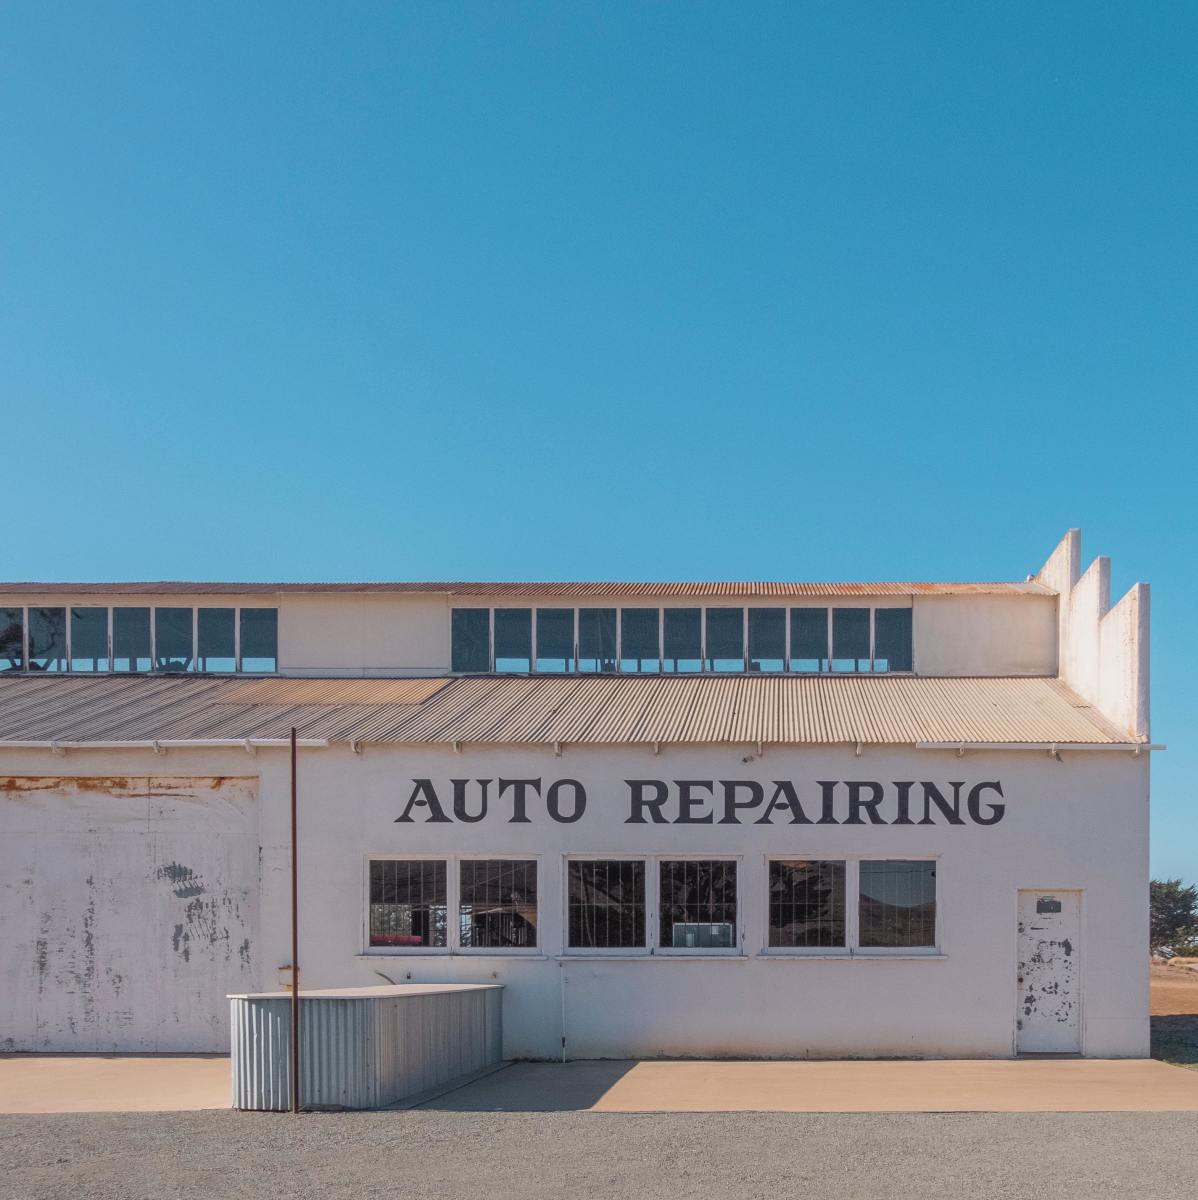 With the right premises and equipment, pening an auto repair shop can be a fulfilling and profitable business. 